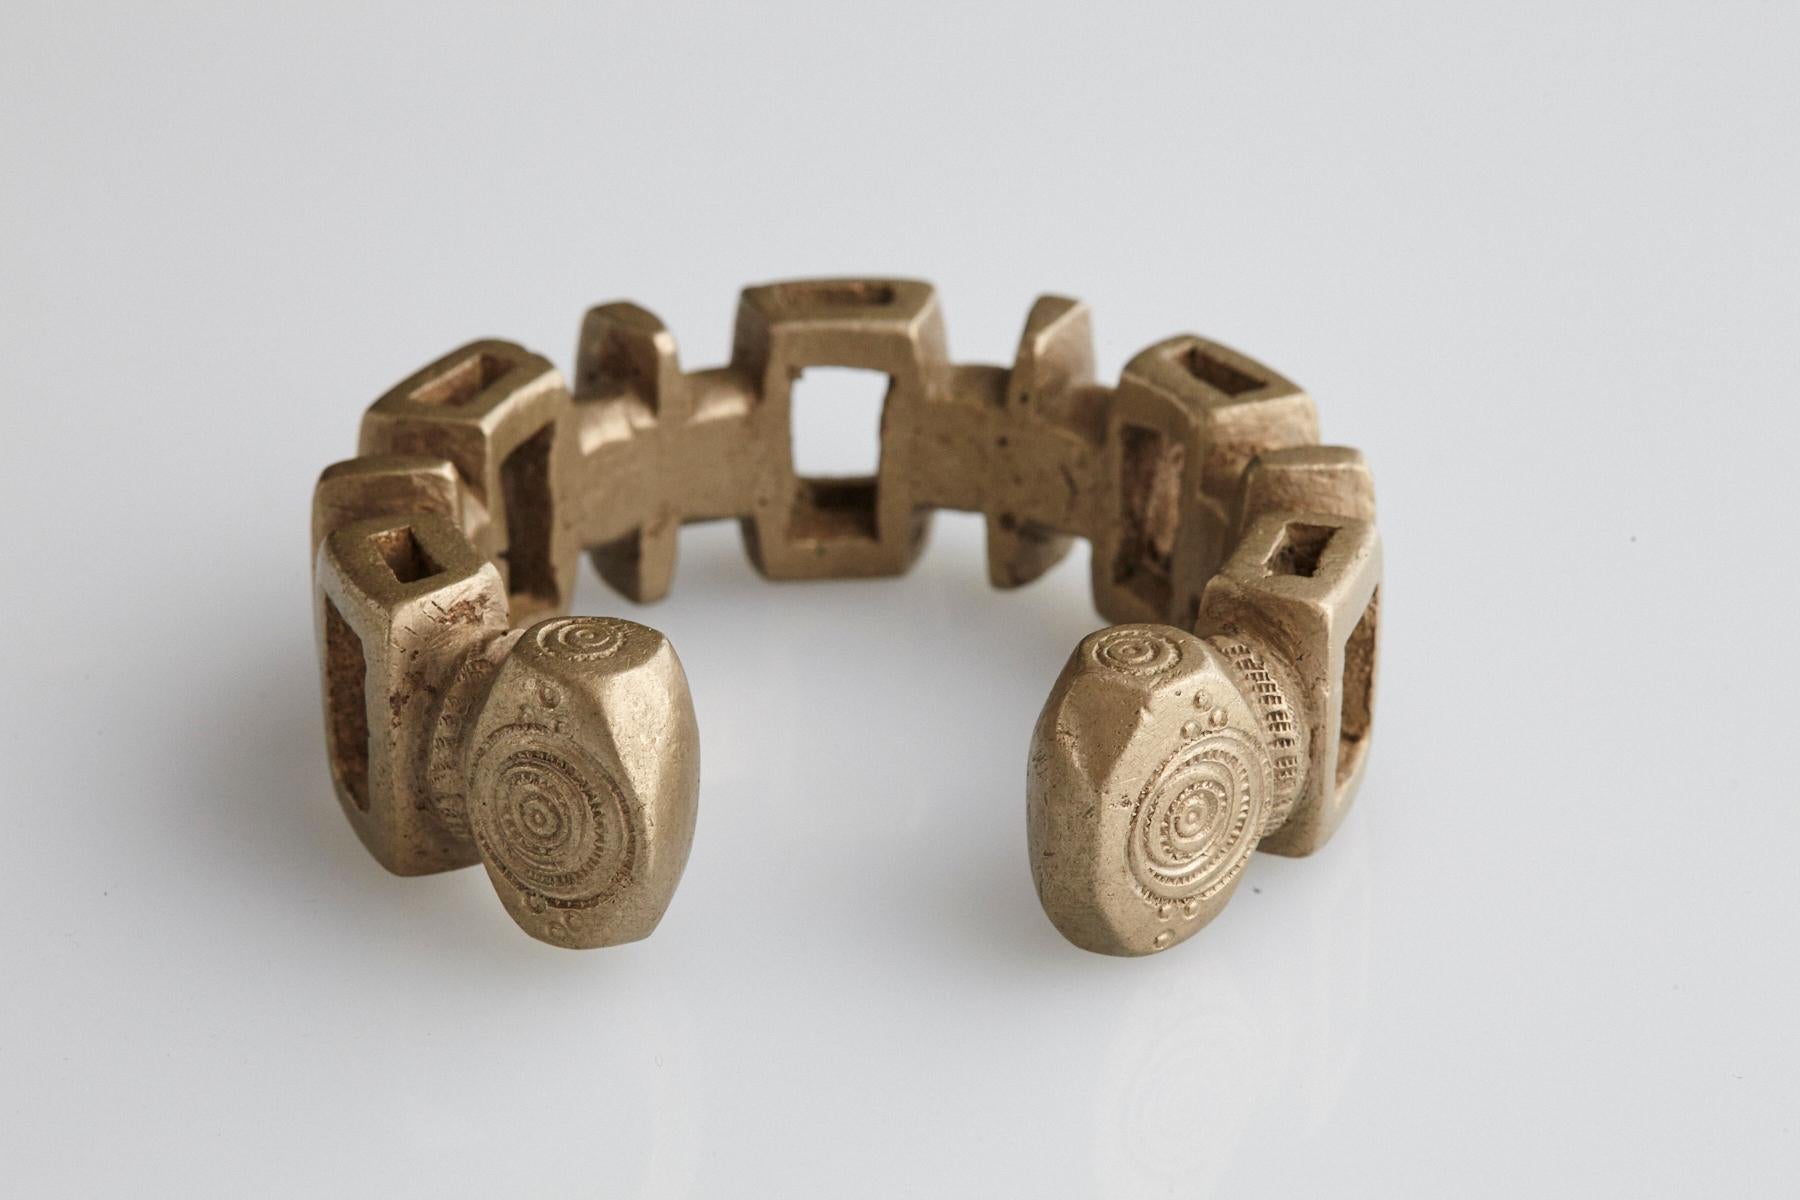 Late 19th or early 20th-century brass or copper alloy with higher nickel content. Bracelet in horseshoe form with fixed opening. Pierced design with rectangular shapes and carved swirling patterns. Nupe People, Nigeria.
170,00 gr / 6.02 oz. Opening